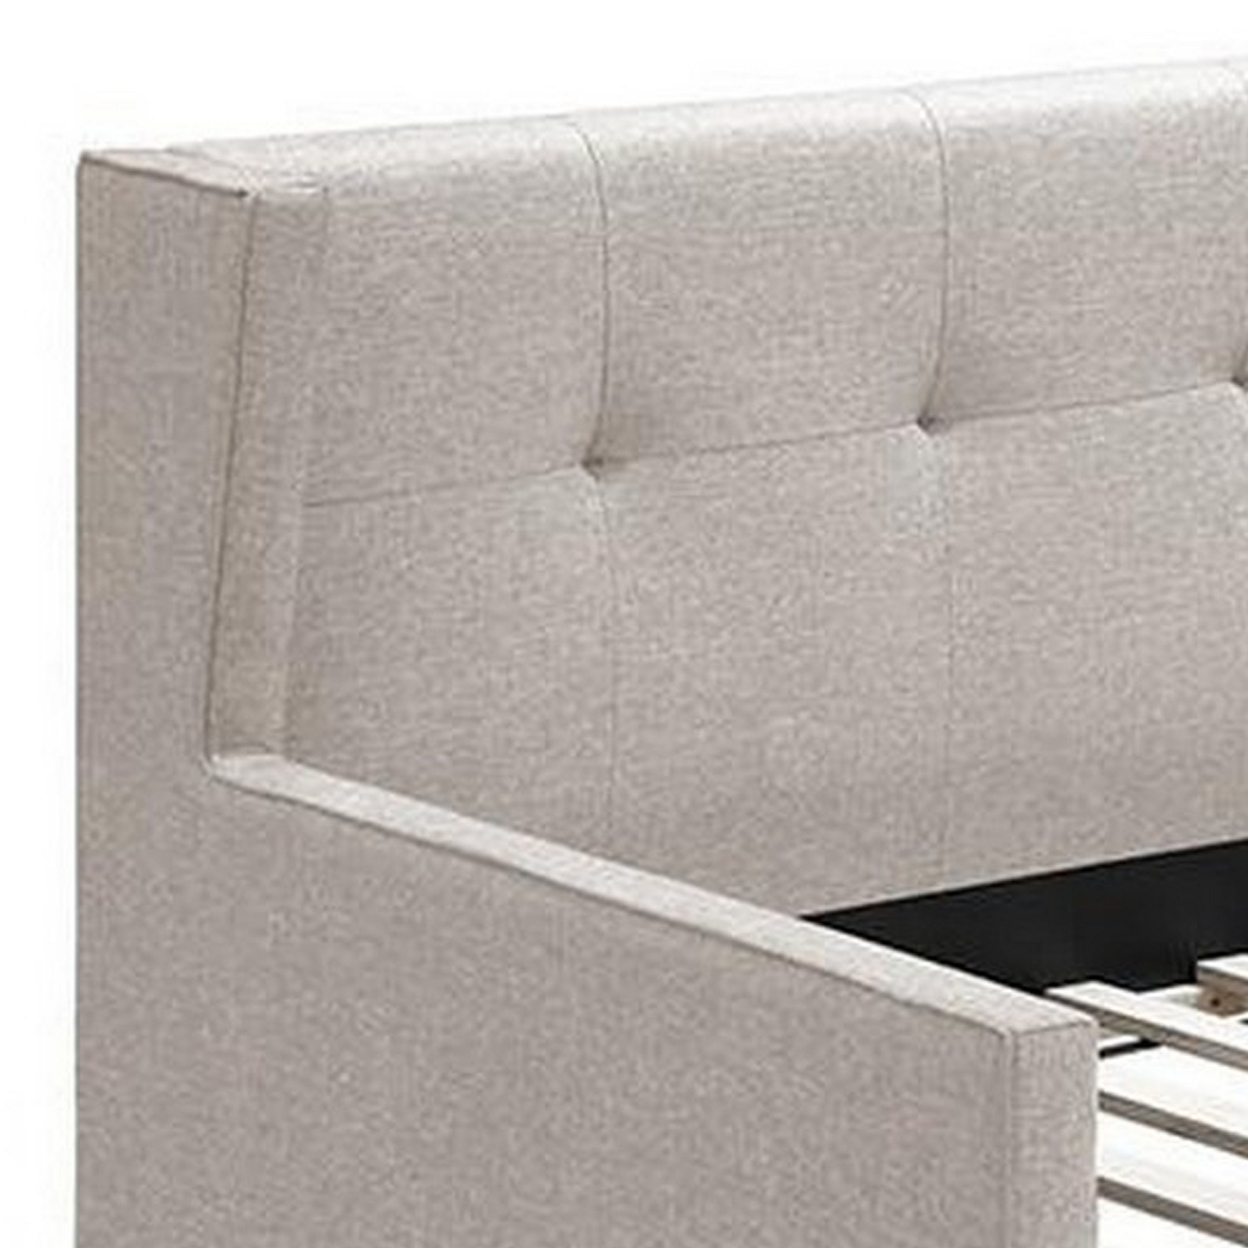 Diem Classic Wood Day Bed With Trundle, Button Tufted Back, Taupe Burlap- Saltoro Sherpi